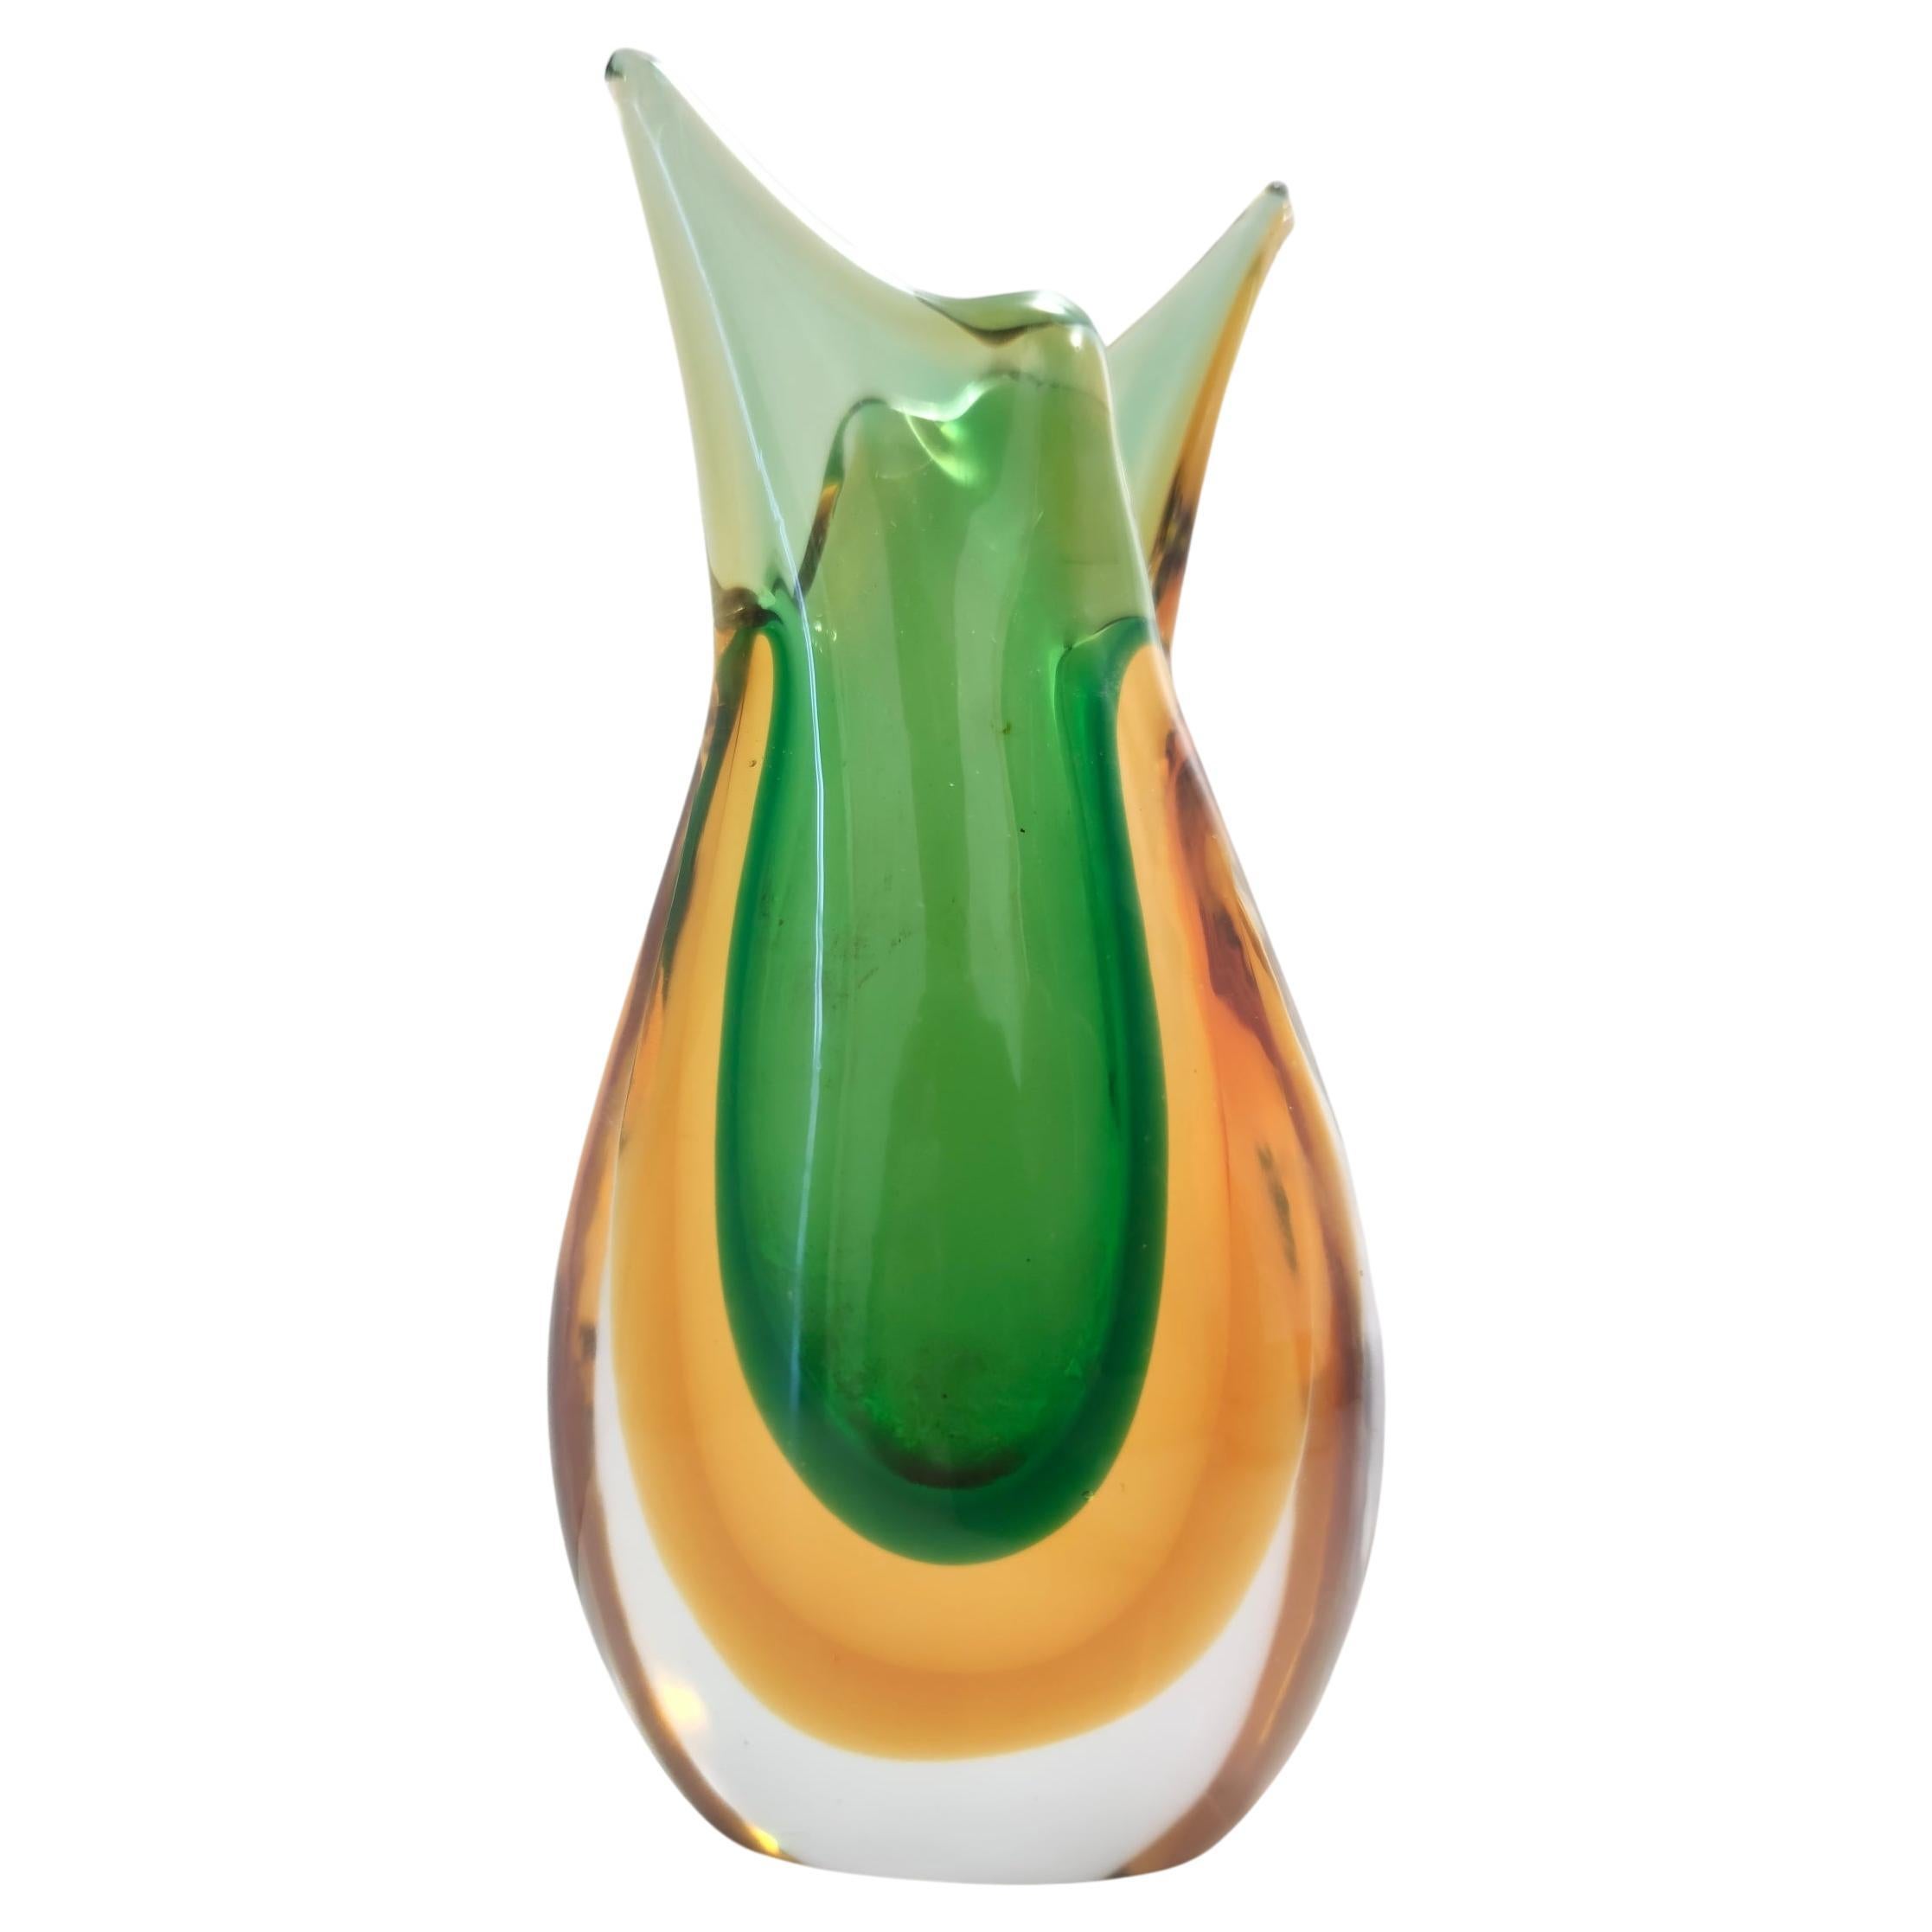 Vintage Green and Orange Sommerso Murano Glass Vase by Flavio Poli, Italy